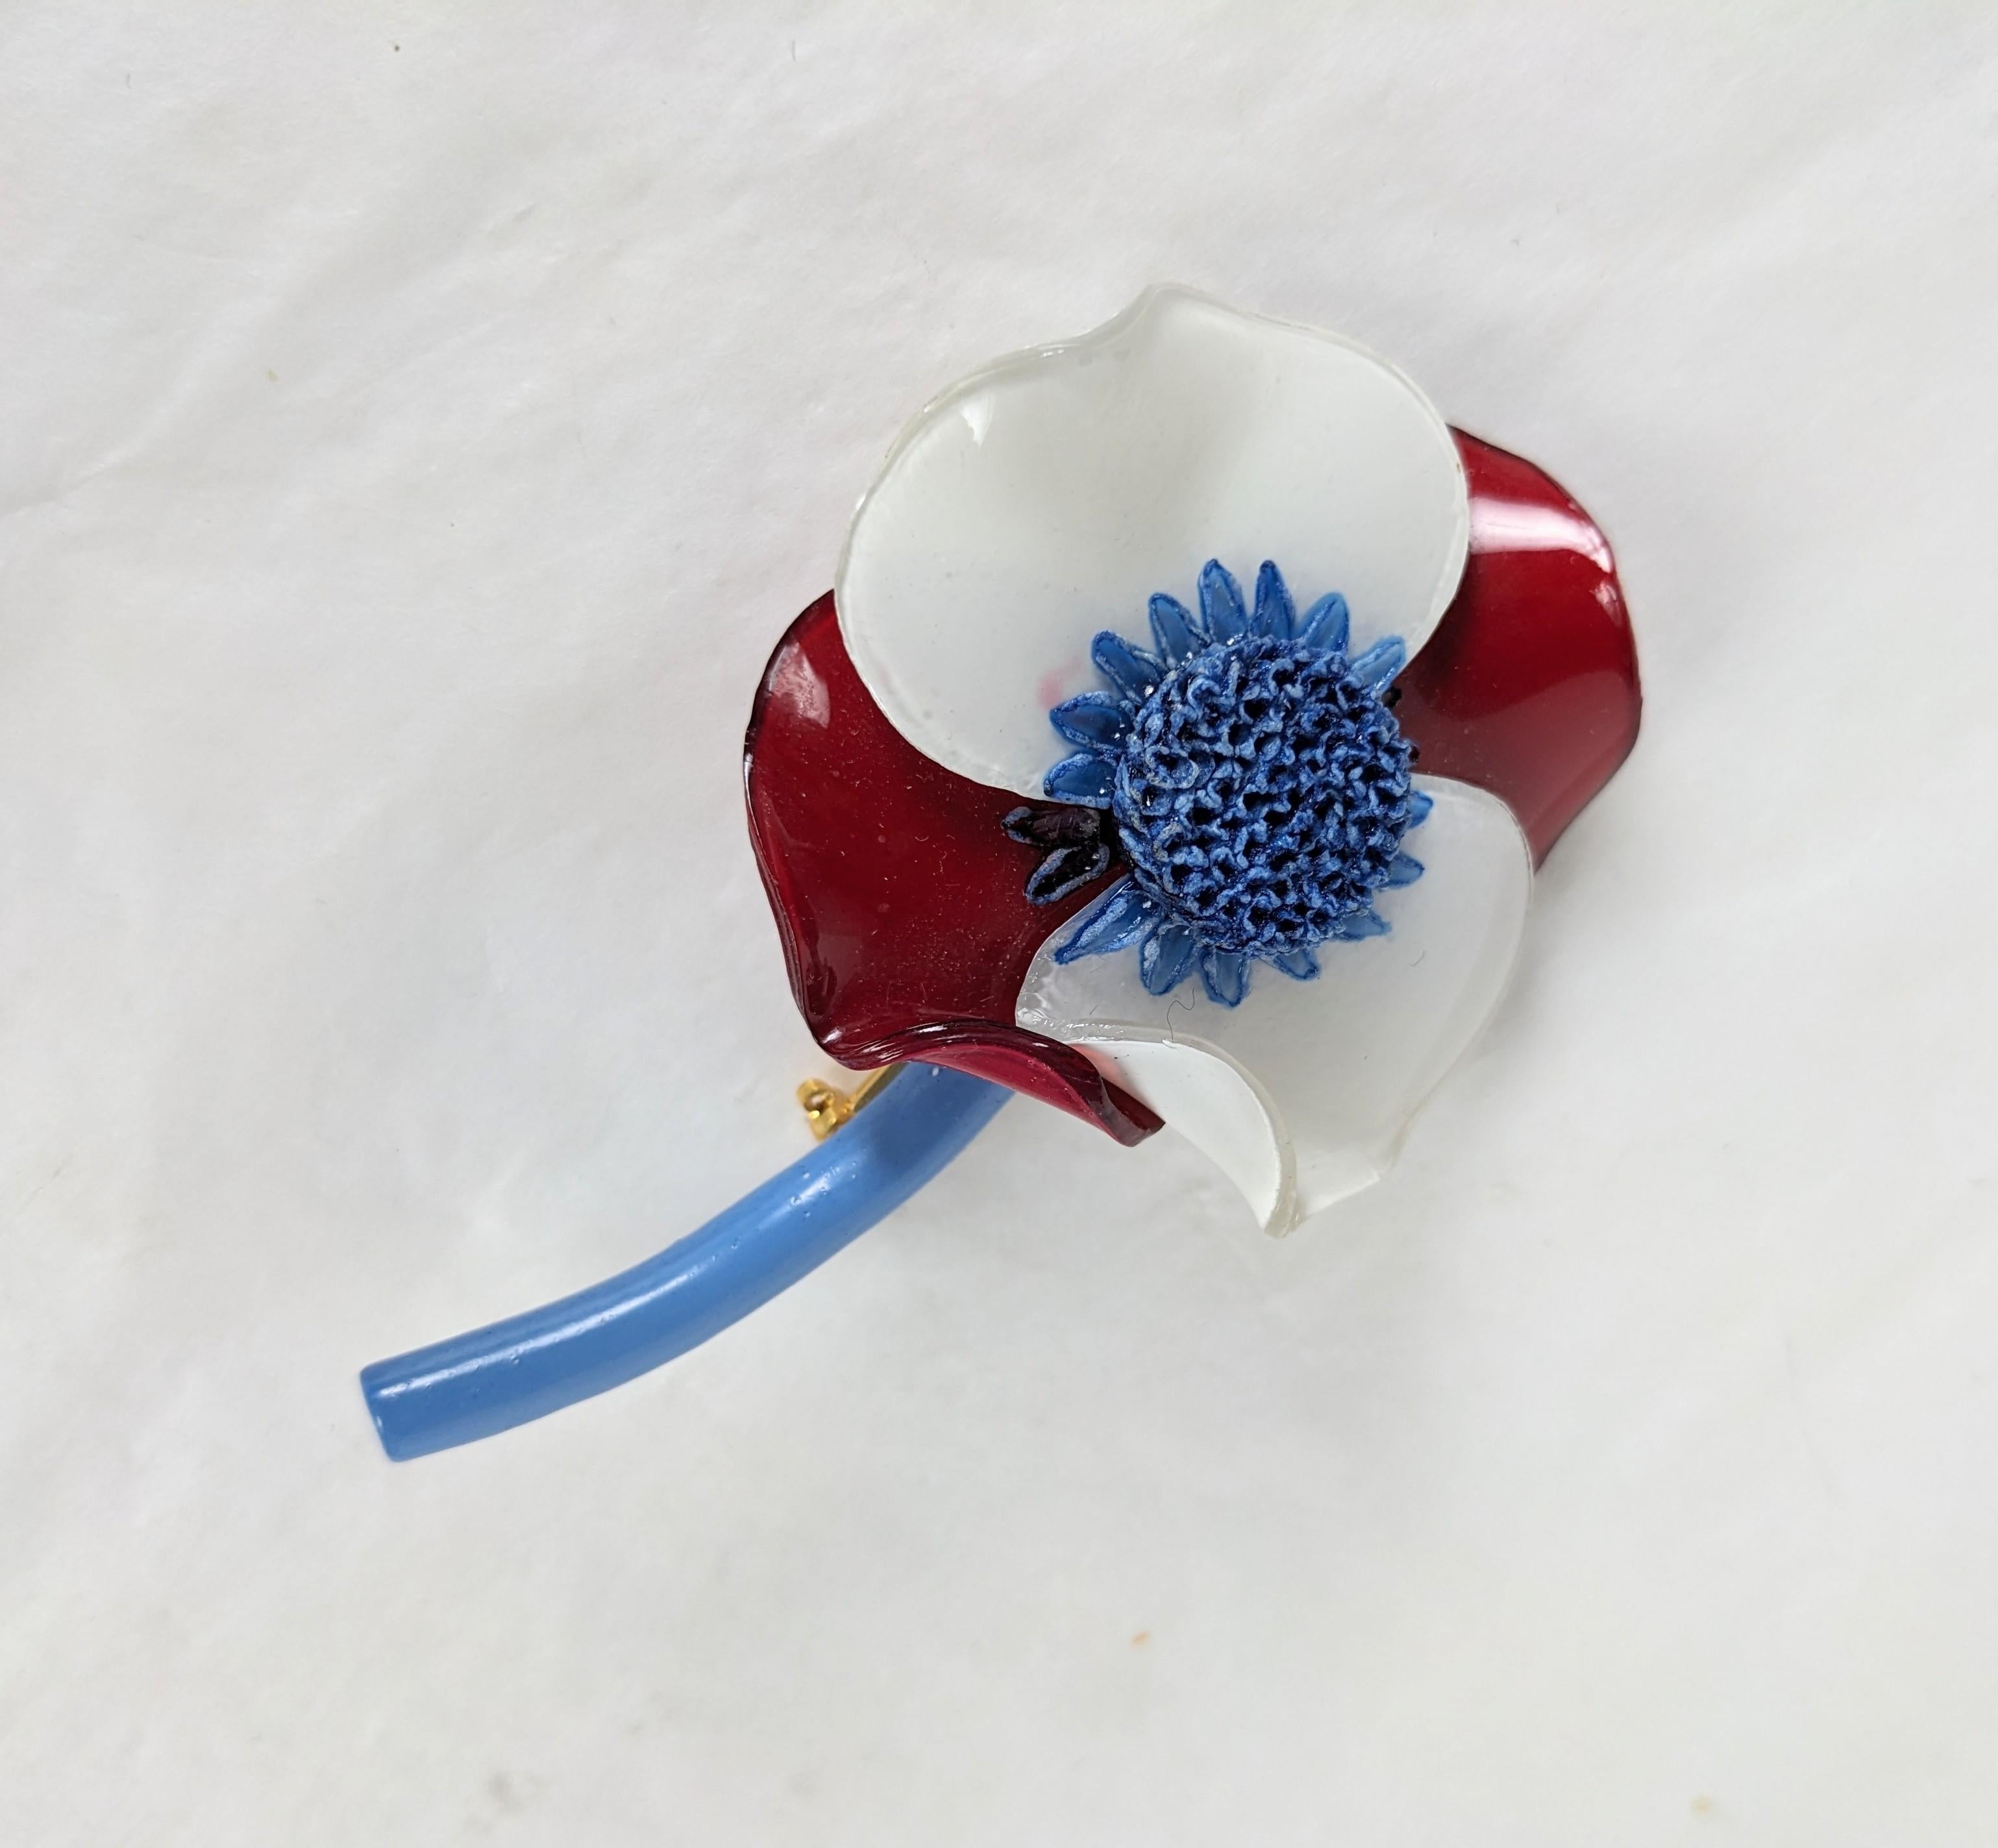 Fabrice Patriotic Flower Brooch In Good Condition For Sale In New York, NY